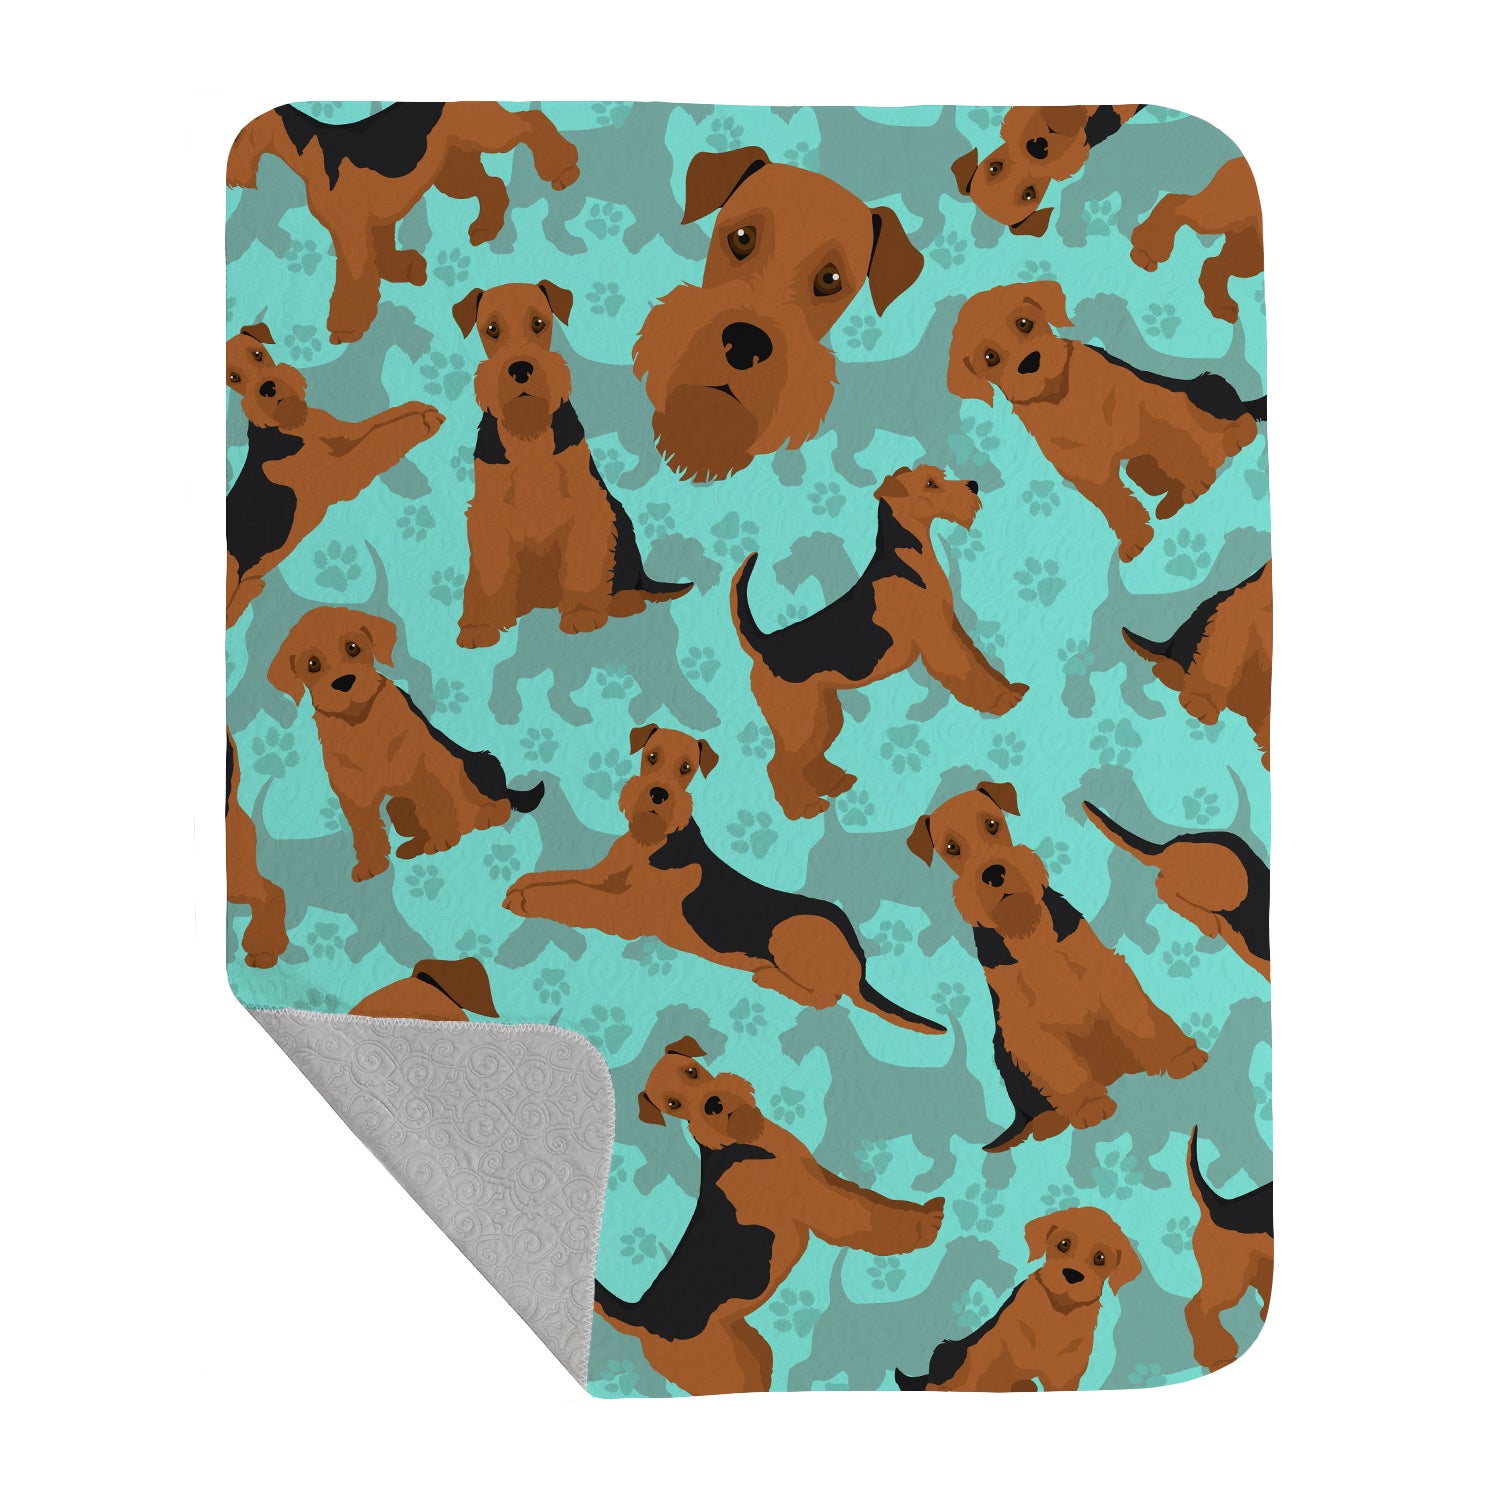 Buy this Airedale Terrier Quilted Blanket 50x60